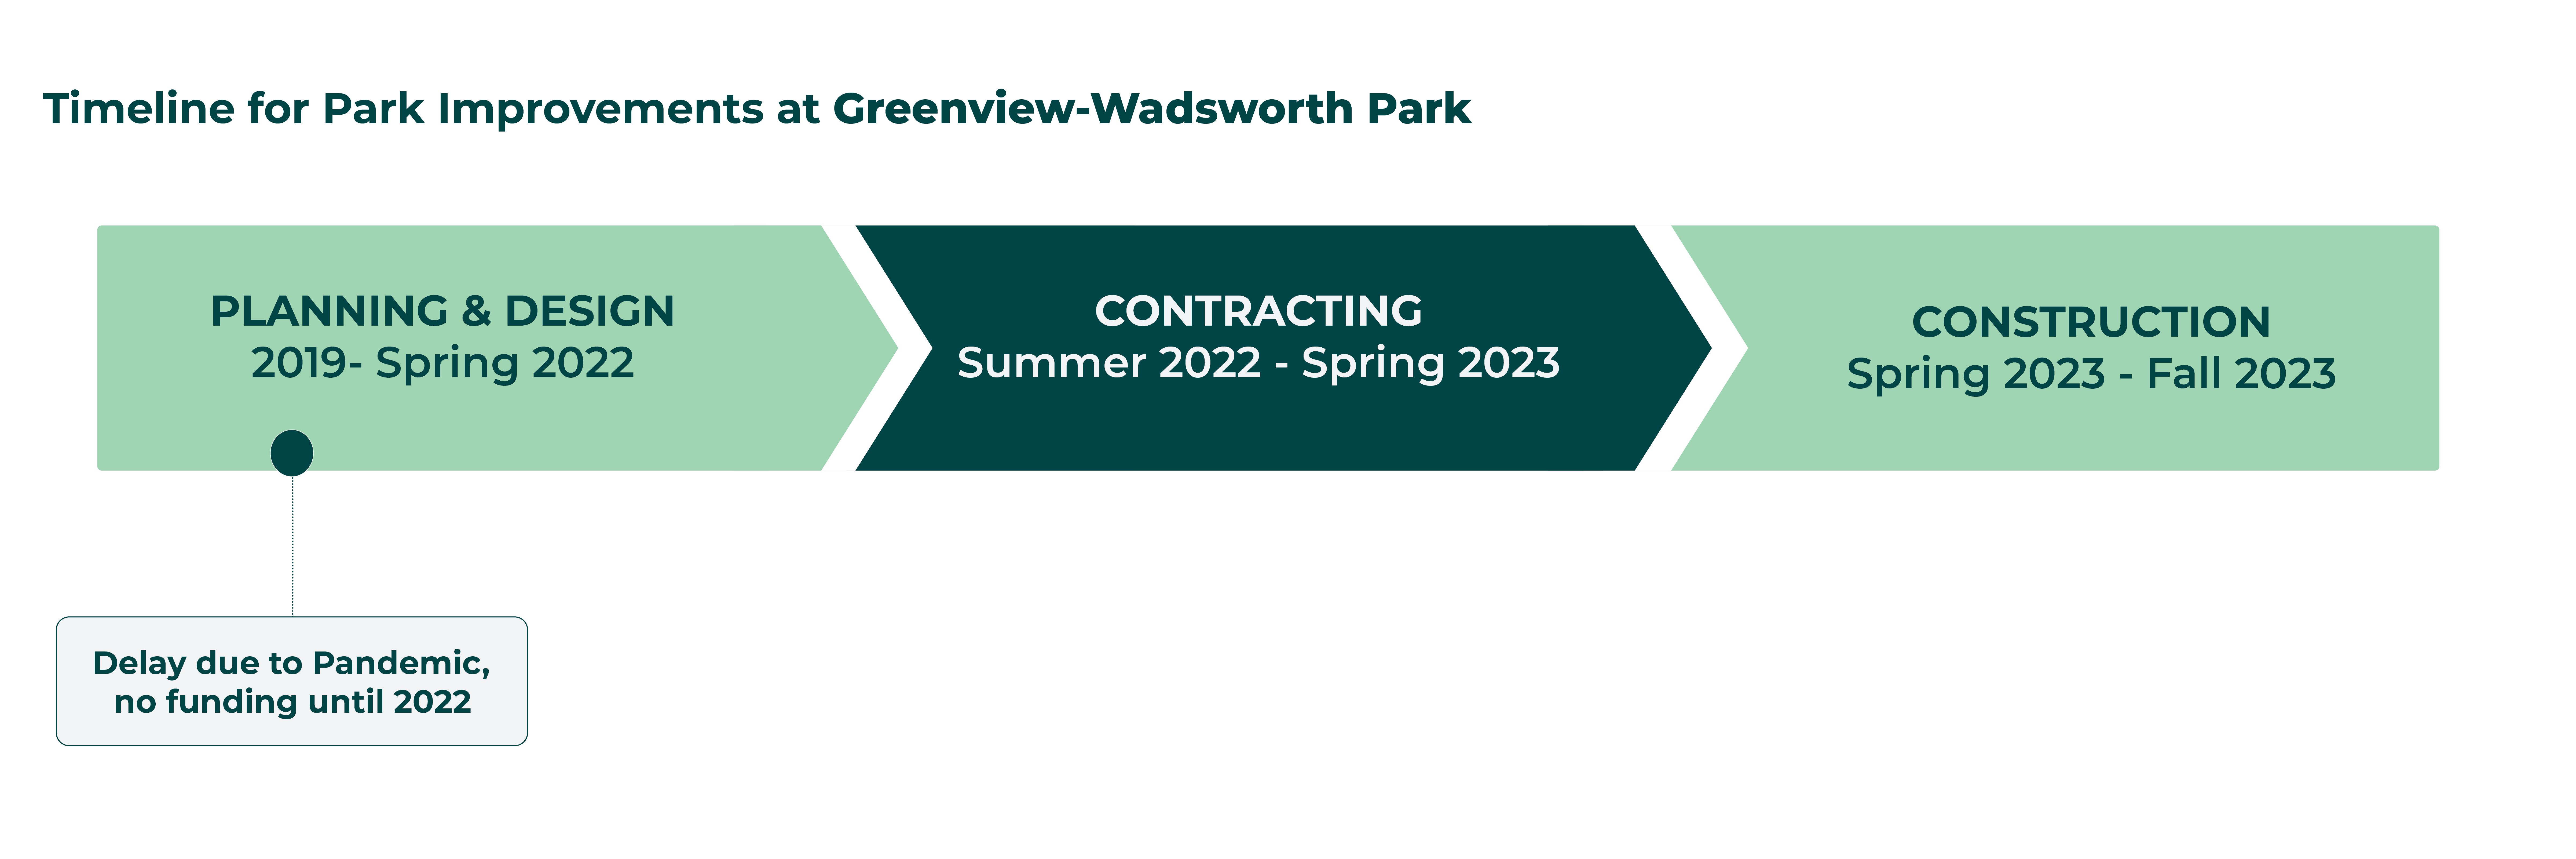 Timeline for Improvements to Greenview-Wadsworth Park